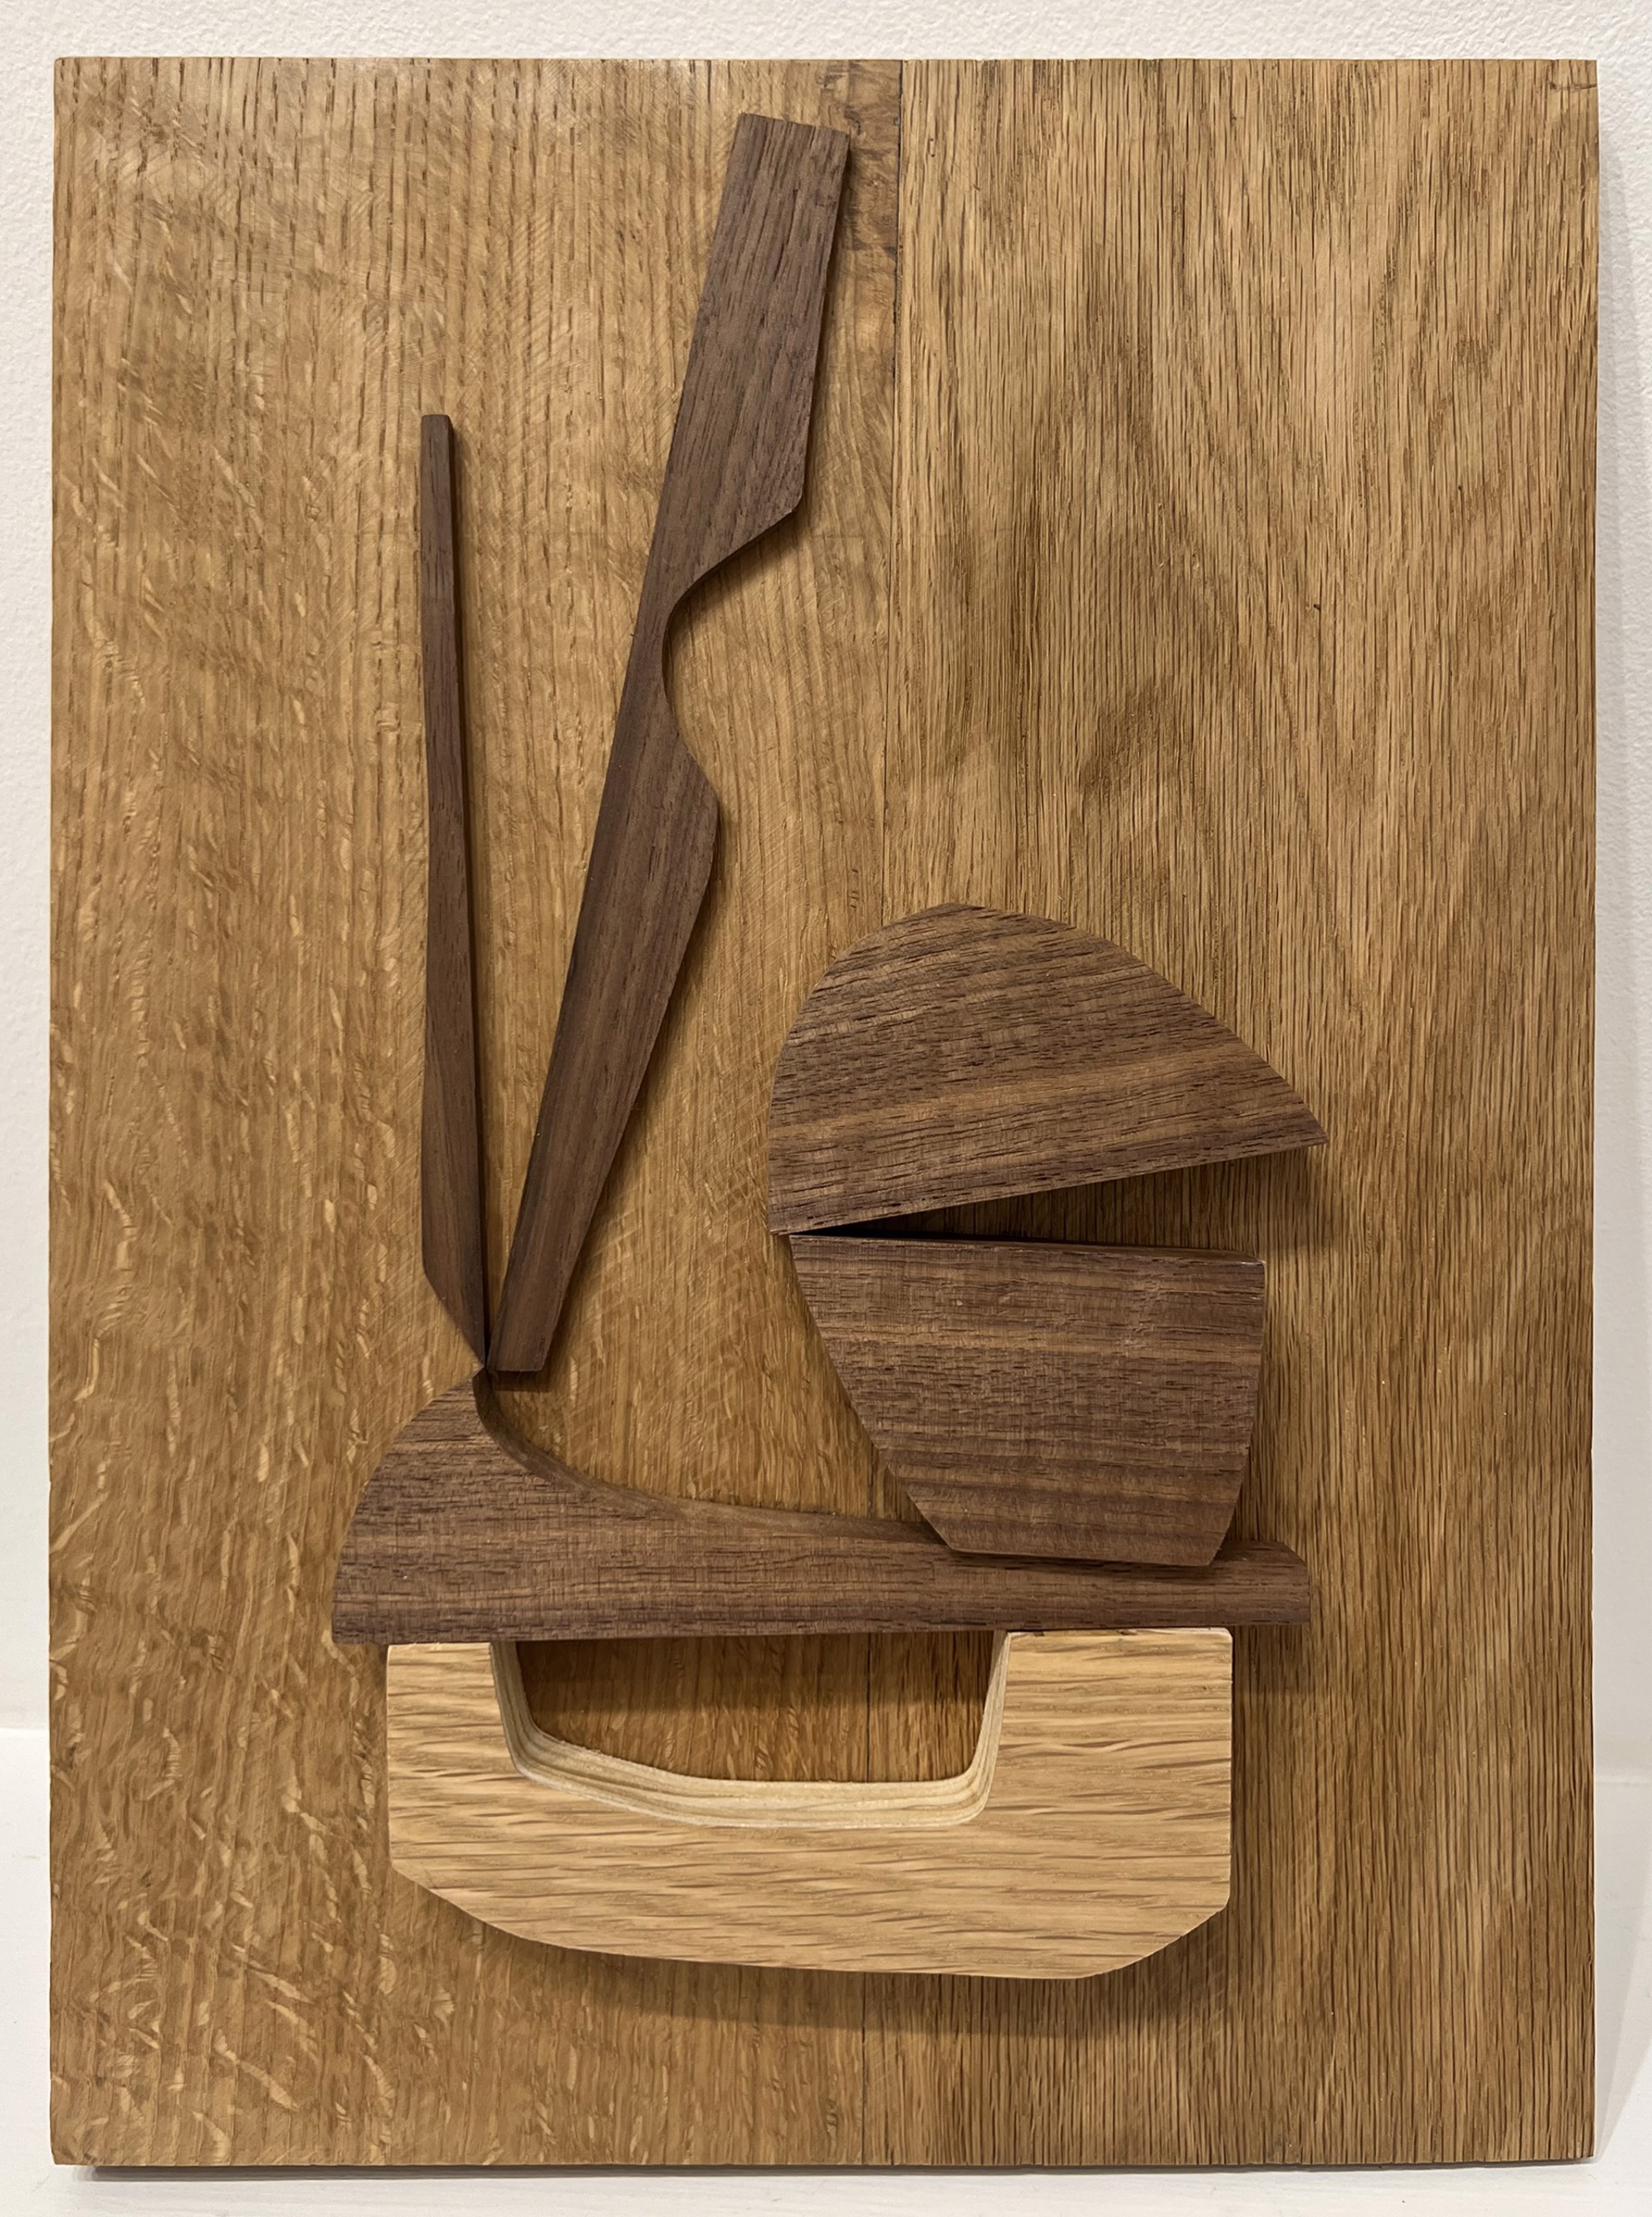 Wood Collage No. 3 by Susan Hable